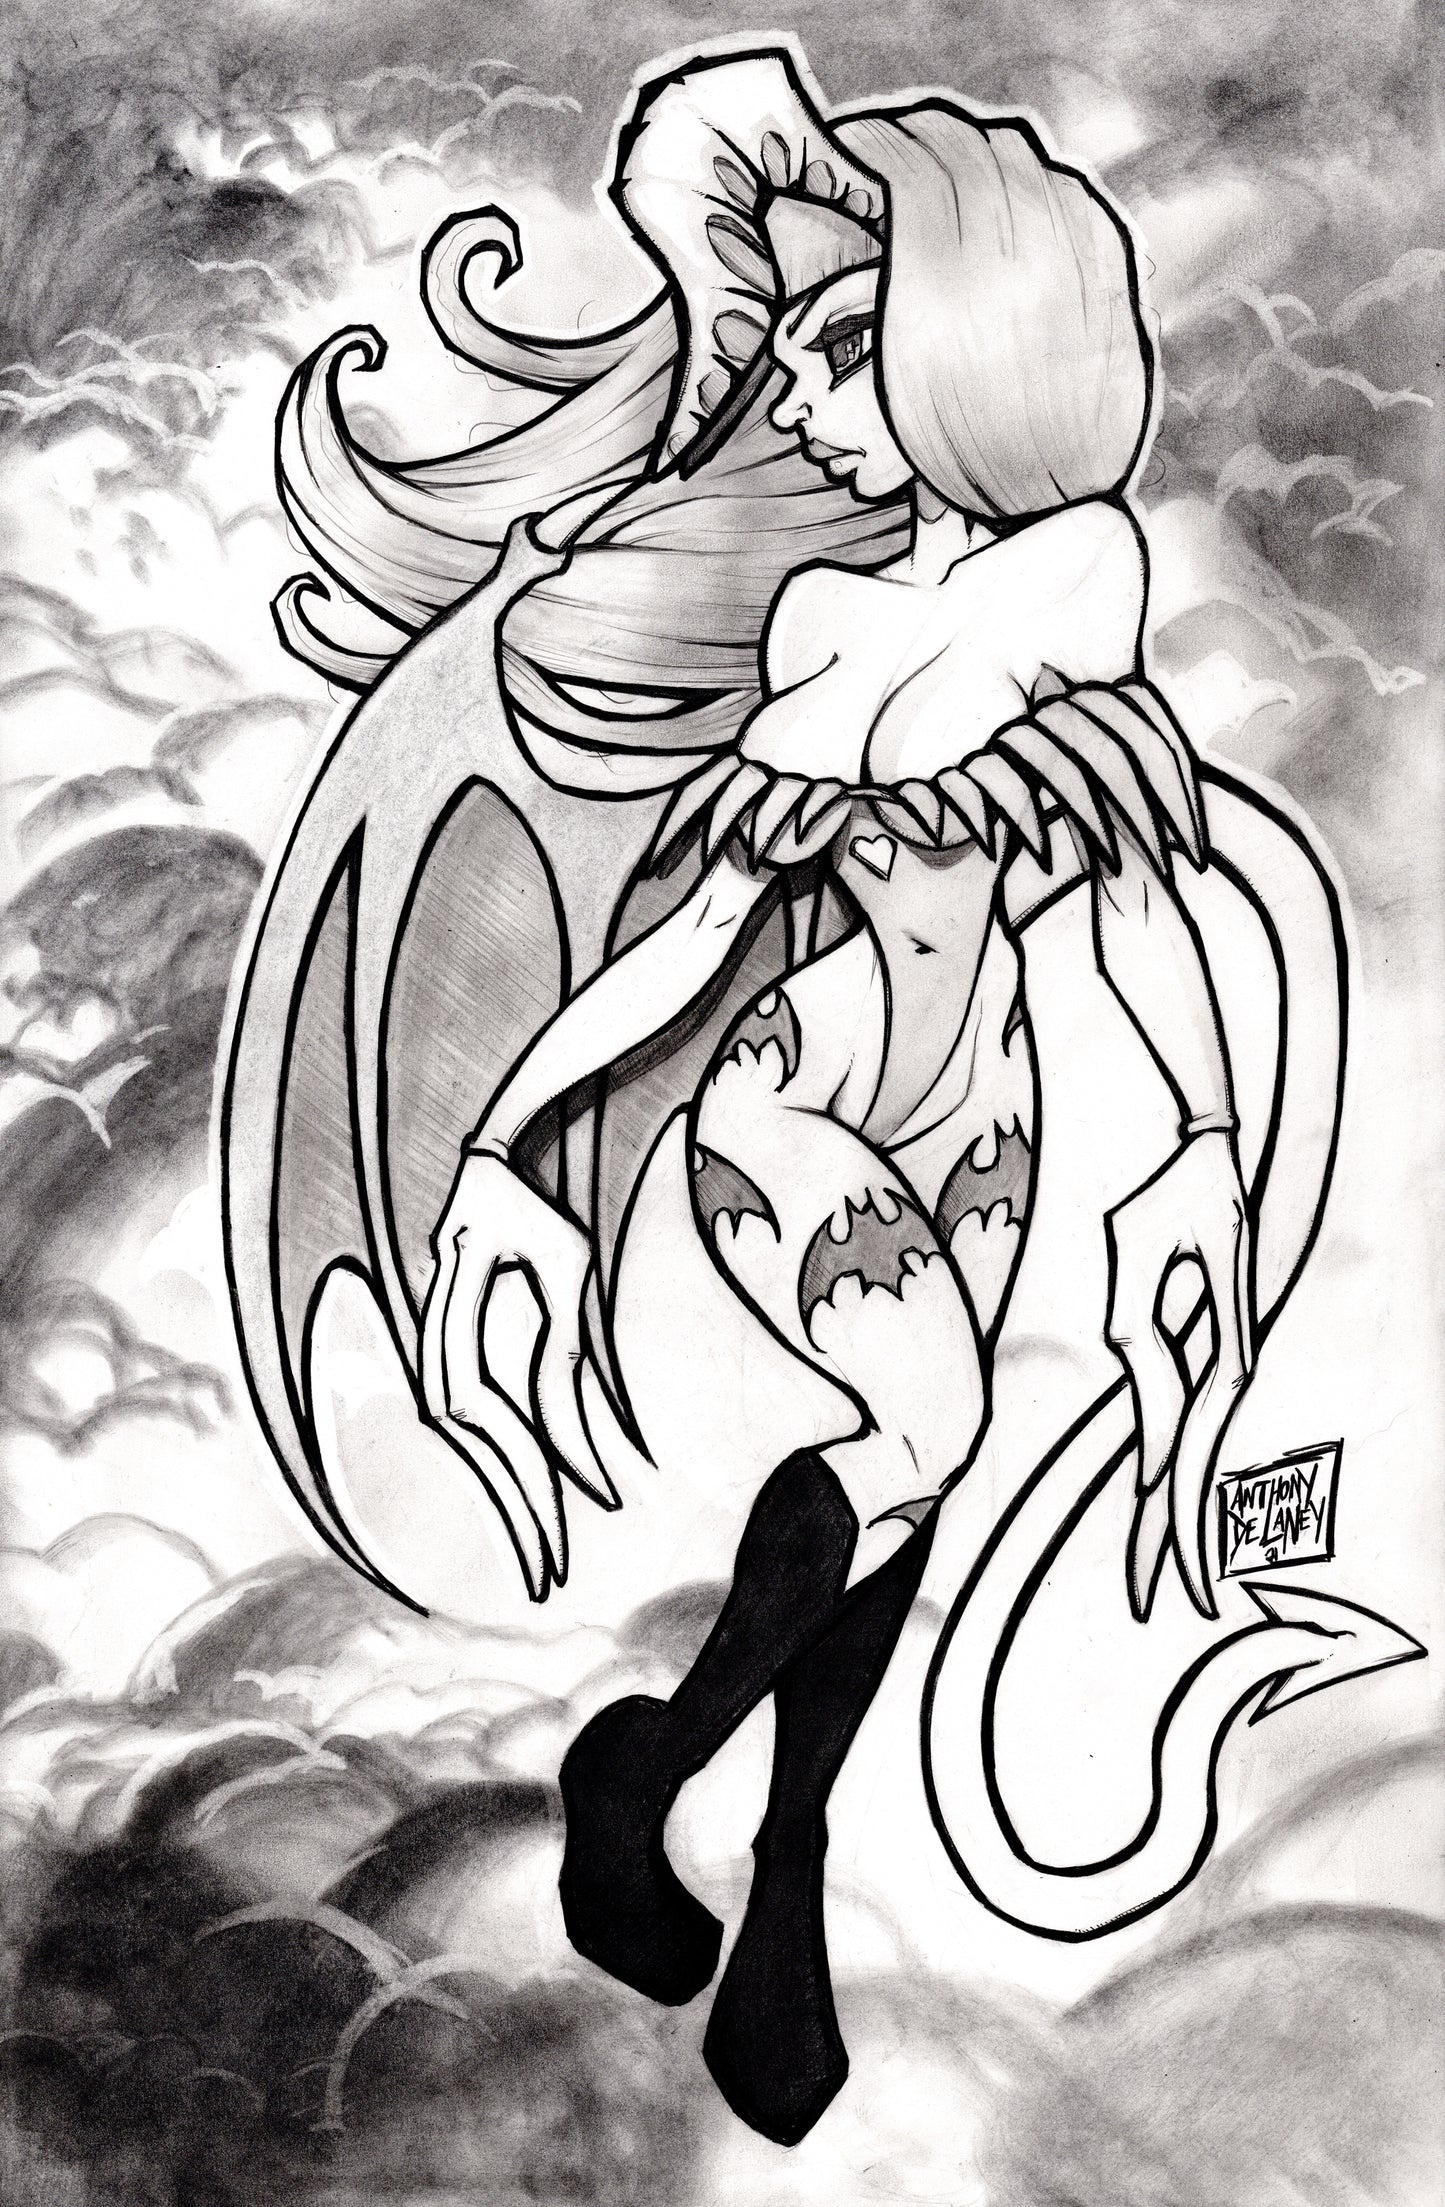 The Changeling Issue 7 Morrigan Cosplay Original Lineart